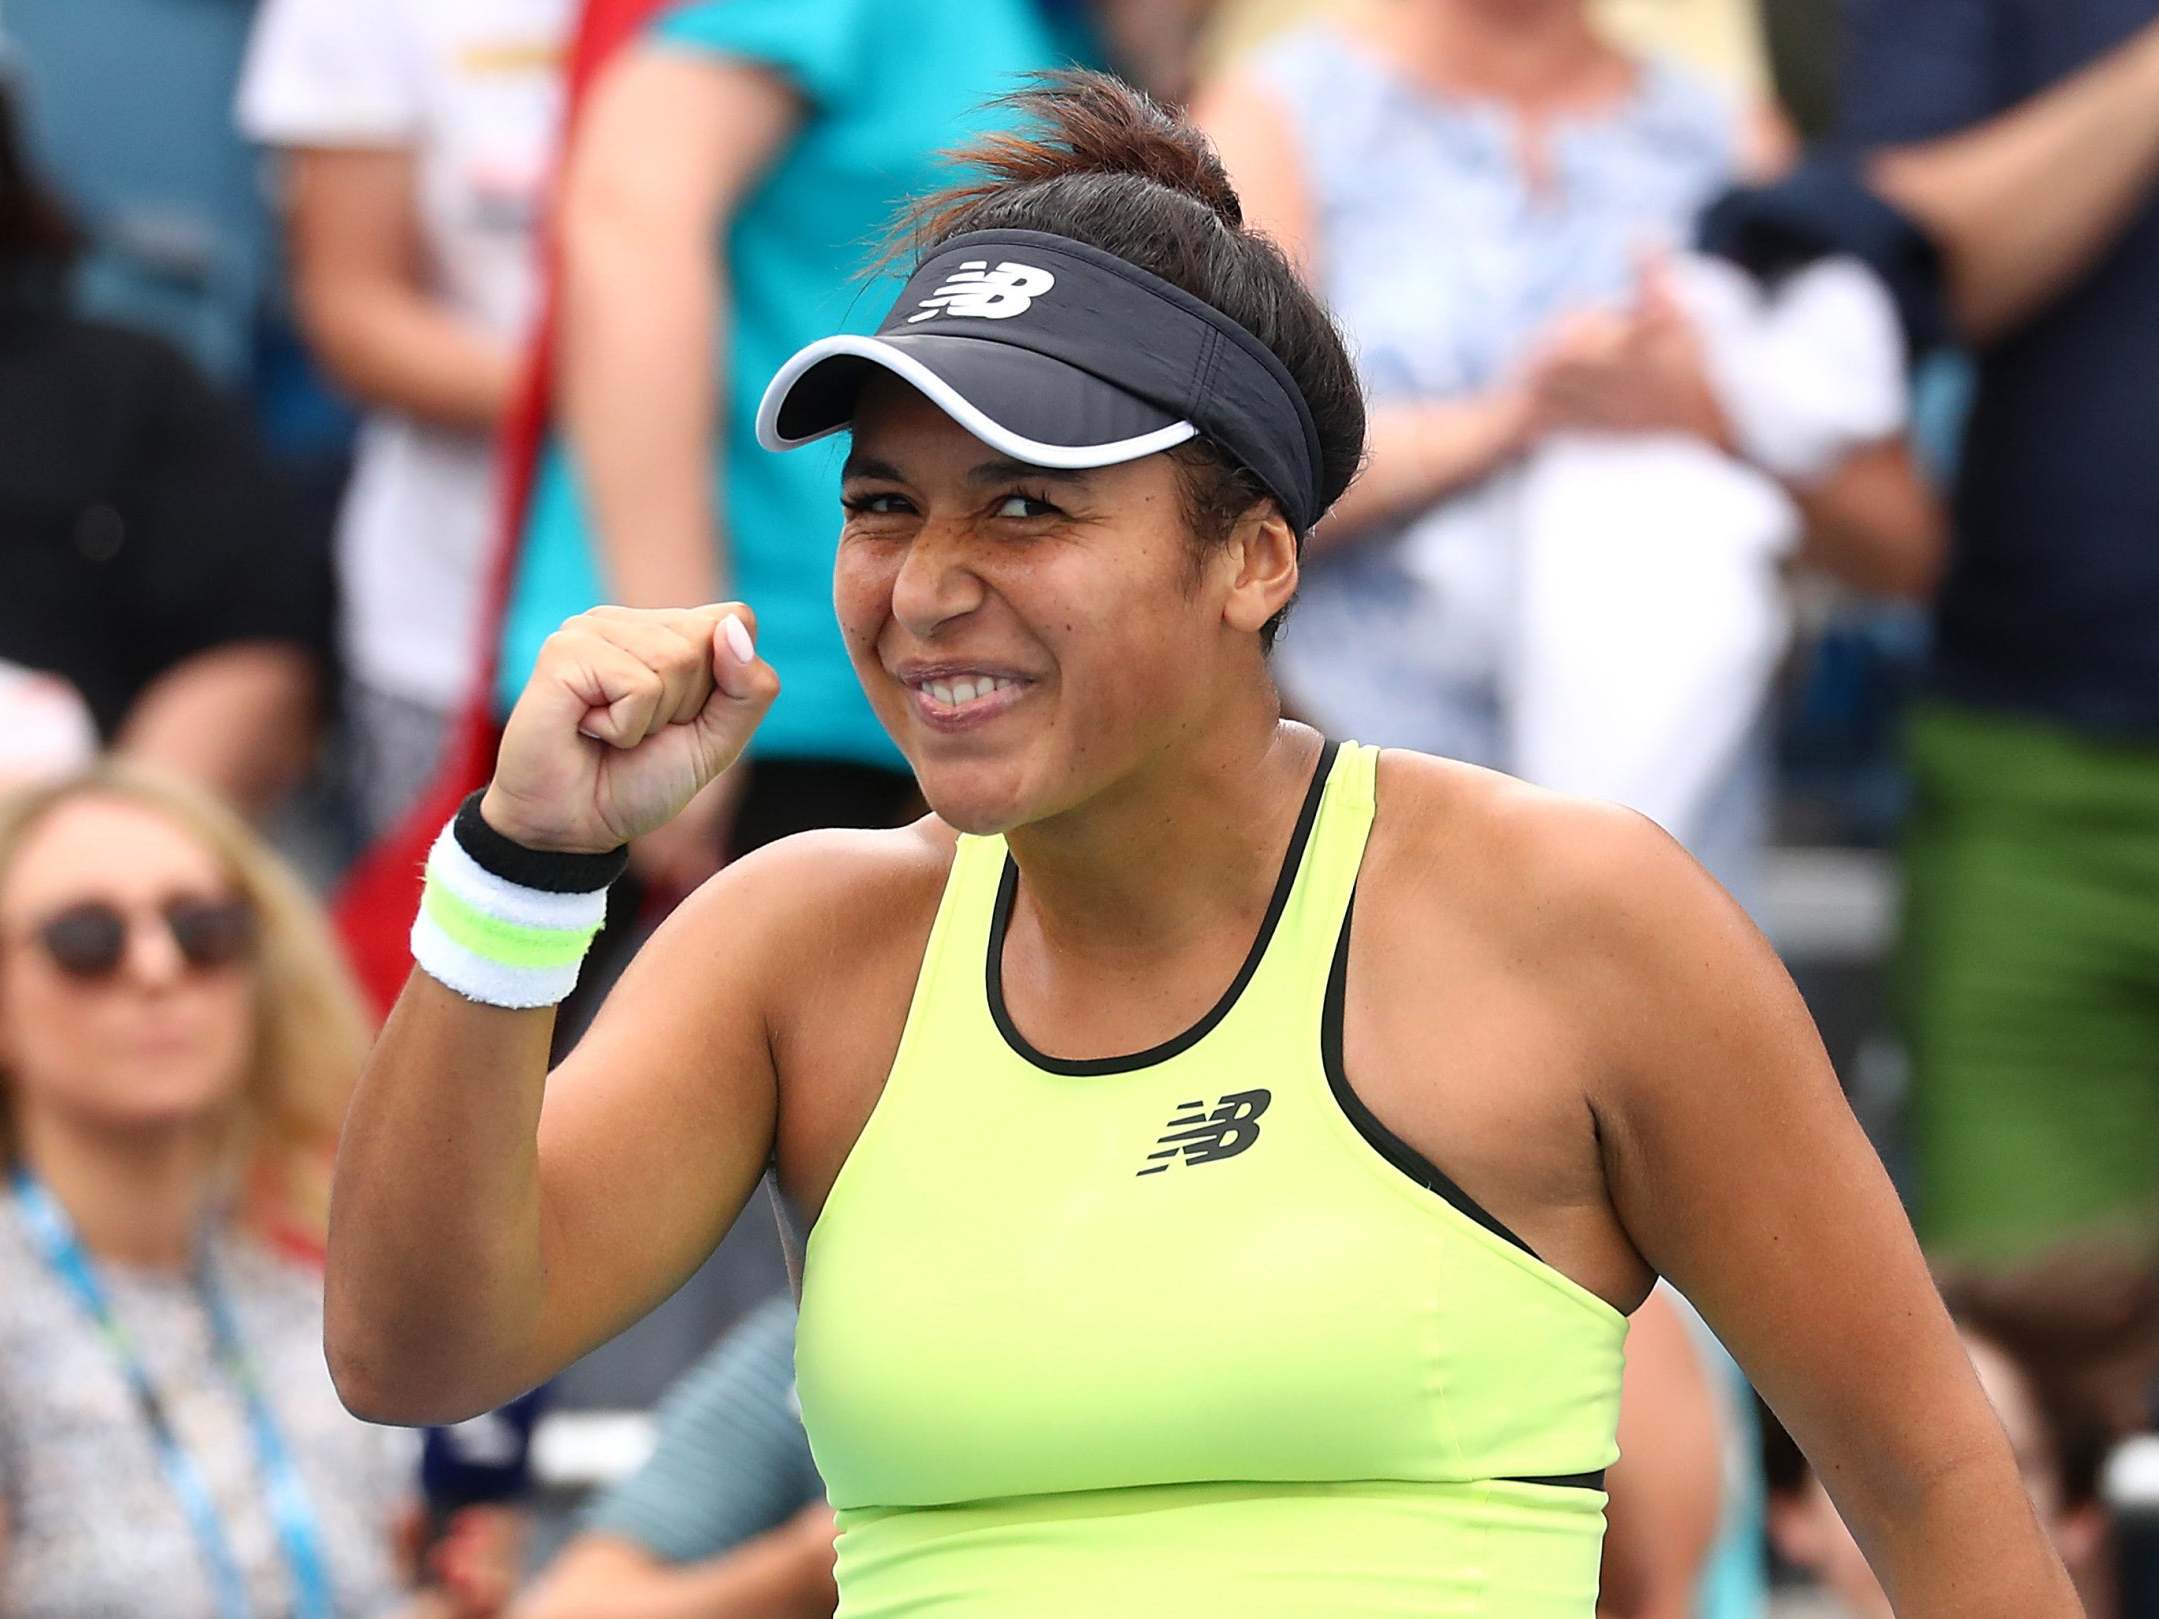 Heather Watson celebrates her first round win at the Australian Open